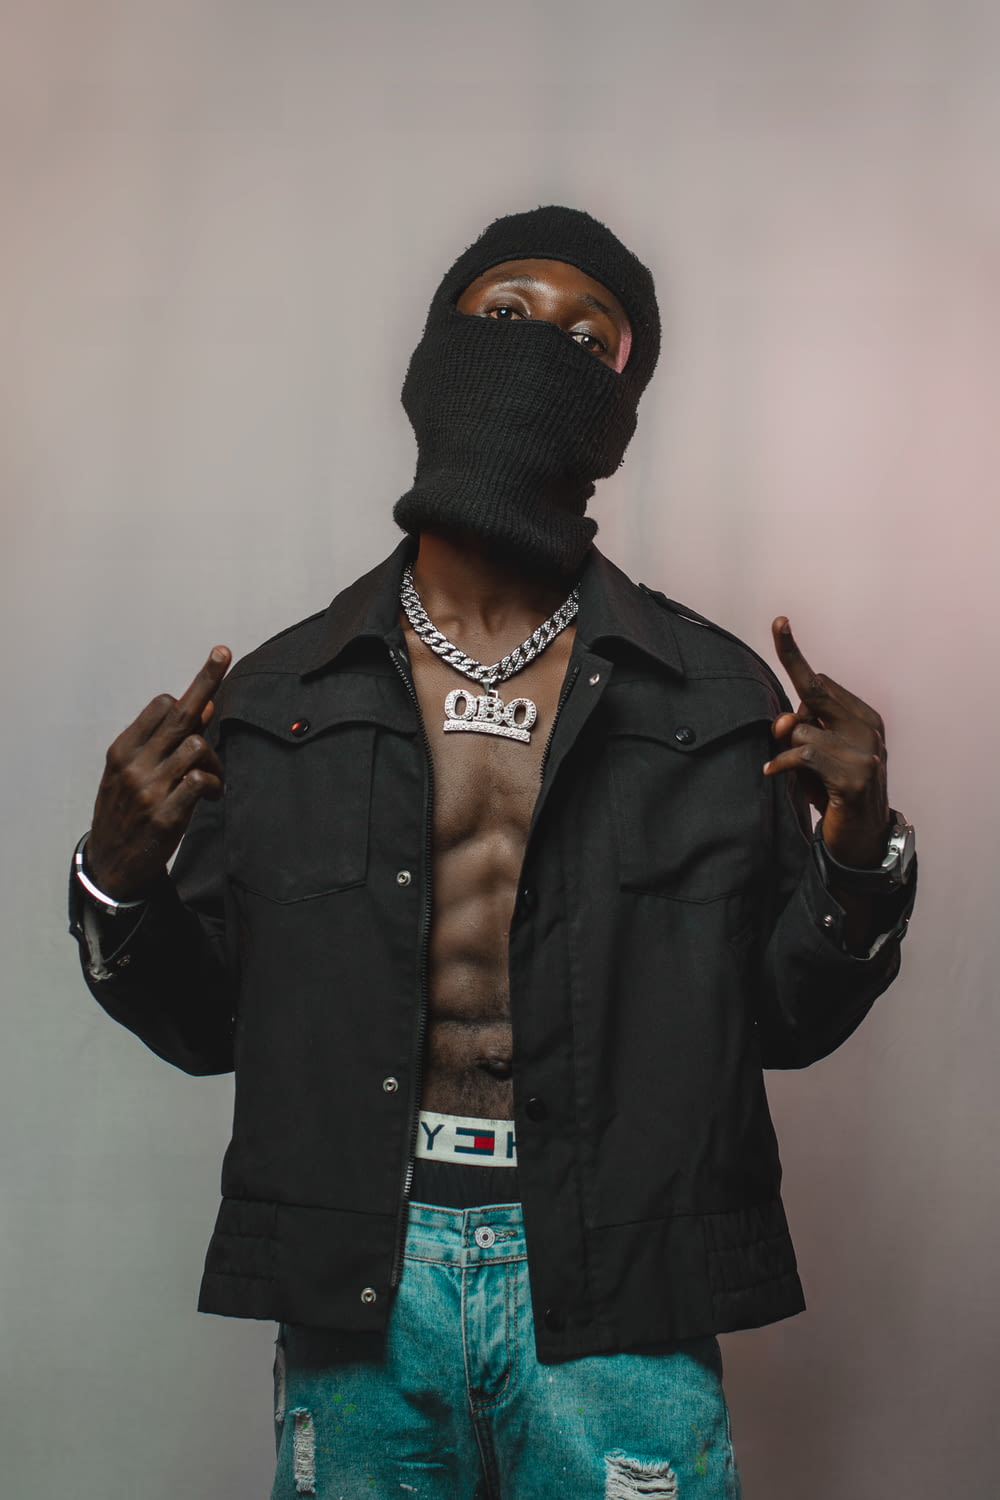 a shirtless man wearing a black mask and jeans